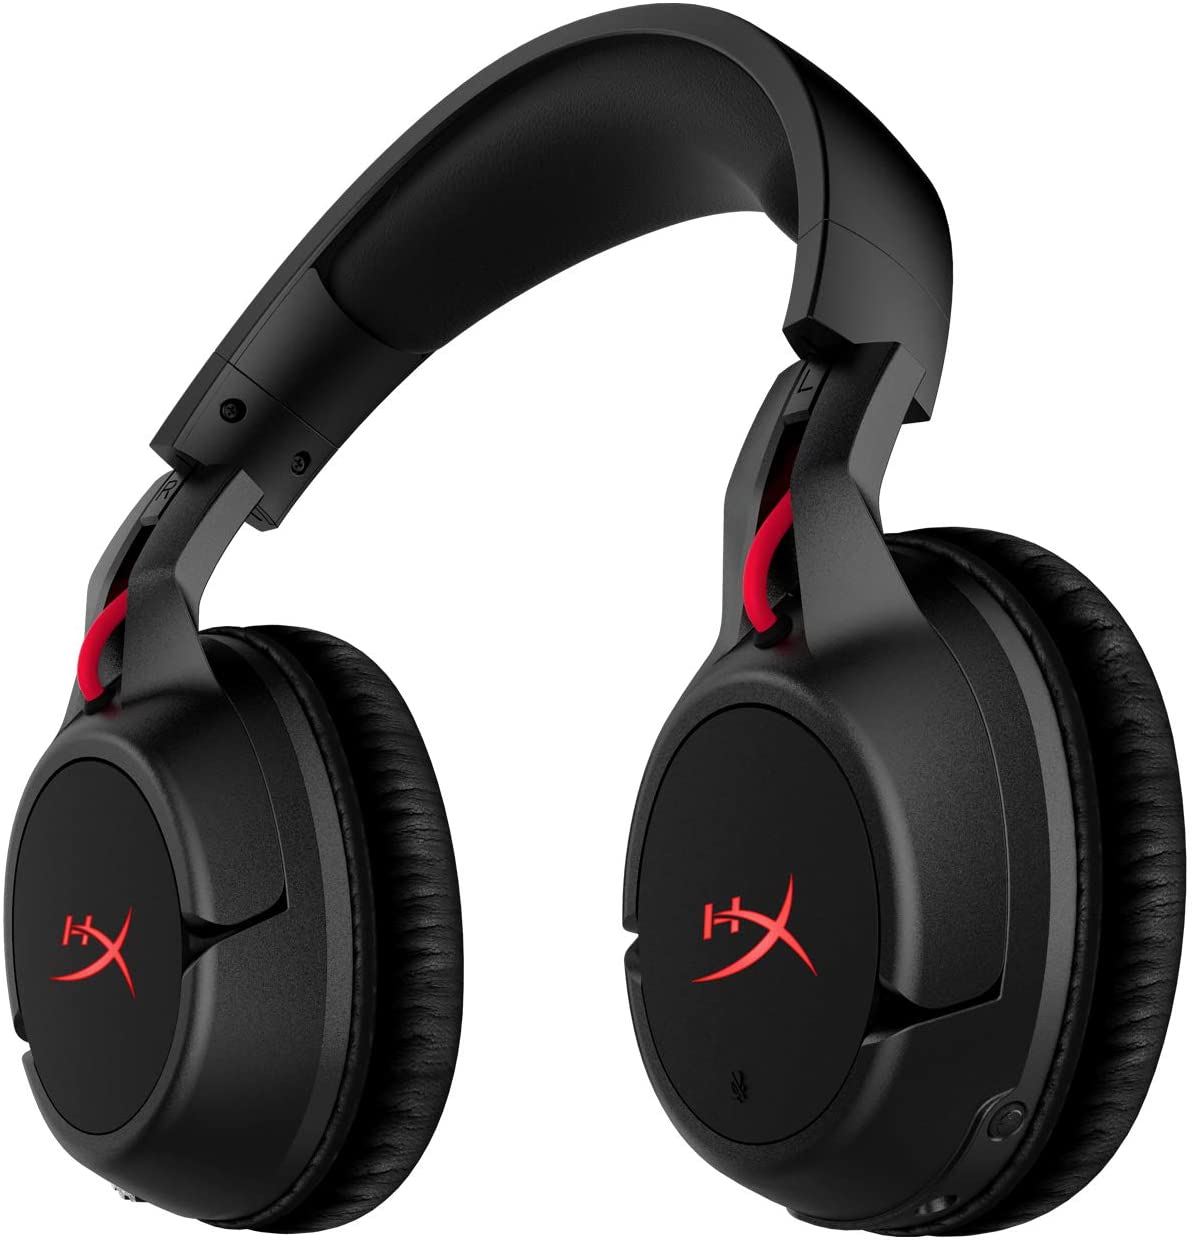 HyperX Cloud Flight Wireless Gaming Headset with Long Lasting Battery Detachable Noise Cancelling Microphone, Red LED Light, Bass, Comfortable Memory Foam for PS4 PC PS4 Pro (HX-HSCF-BK/AM)